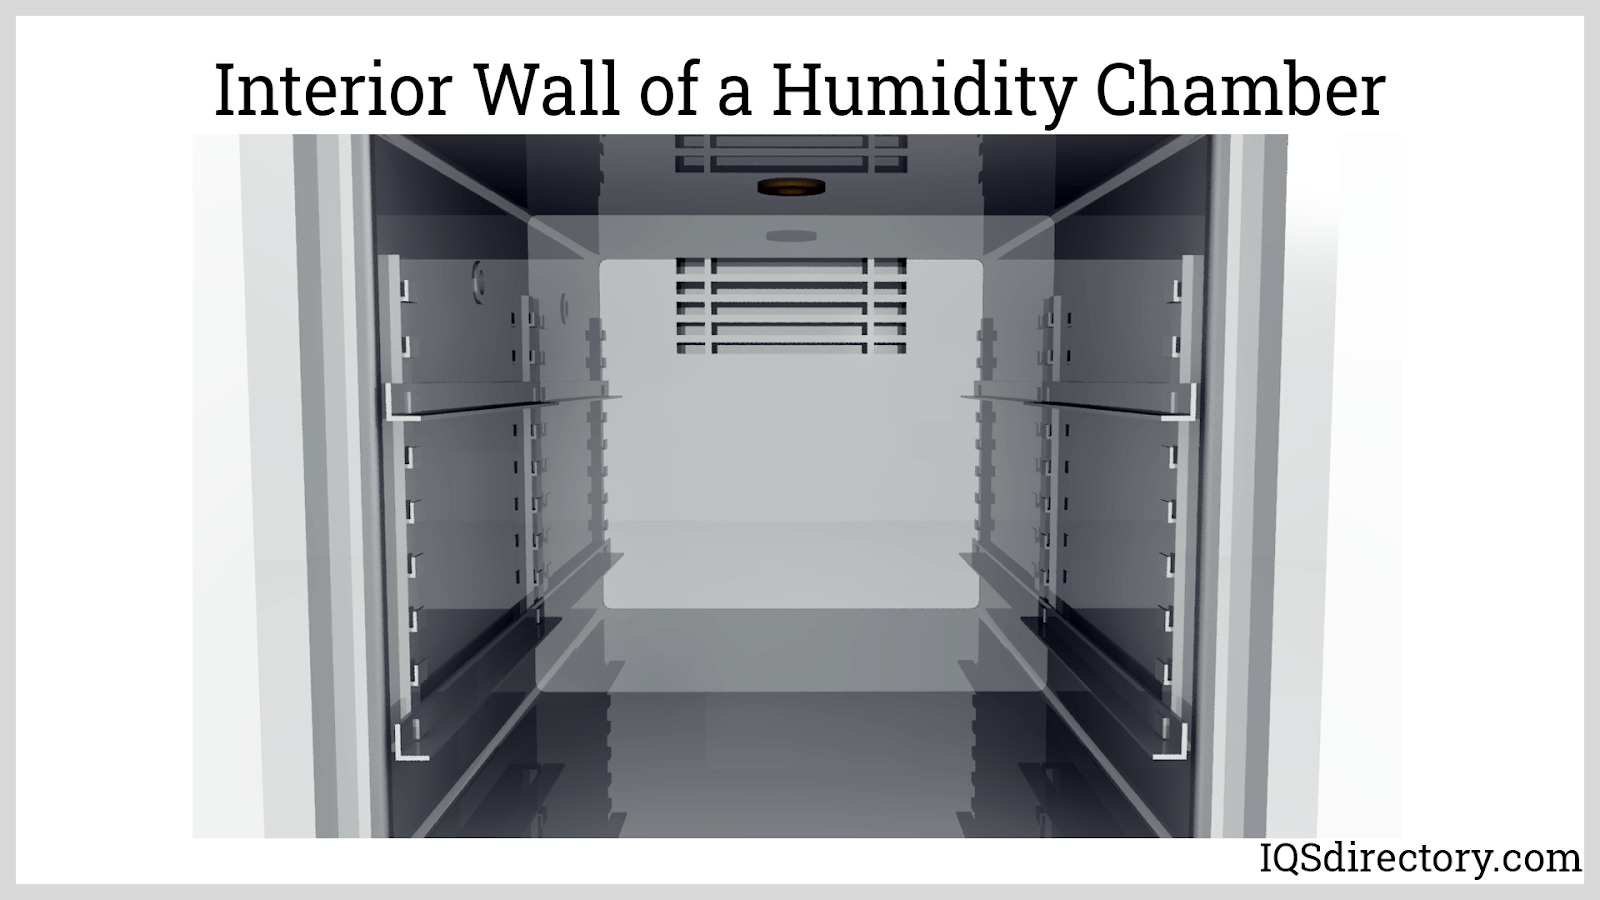 Interior Wall of a Humidity Chamber